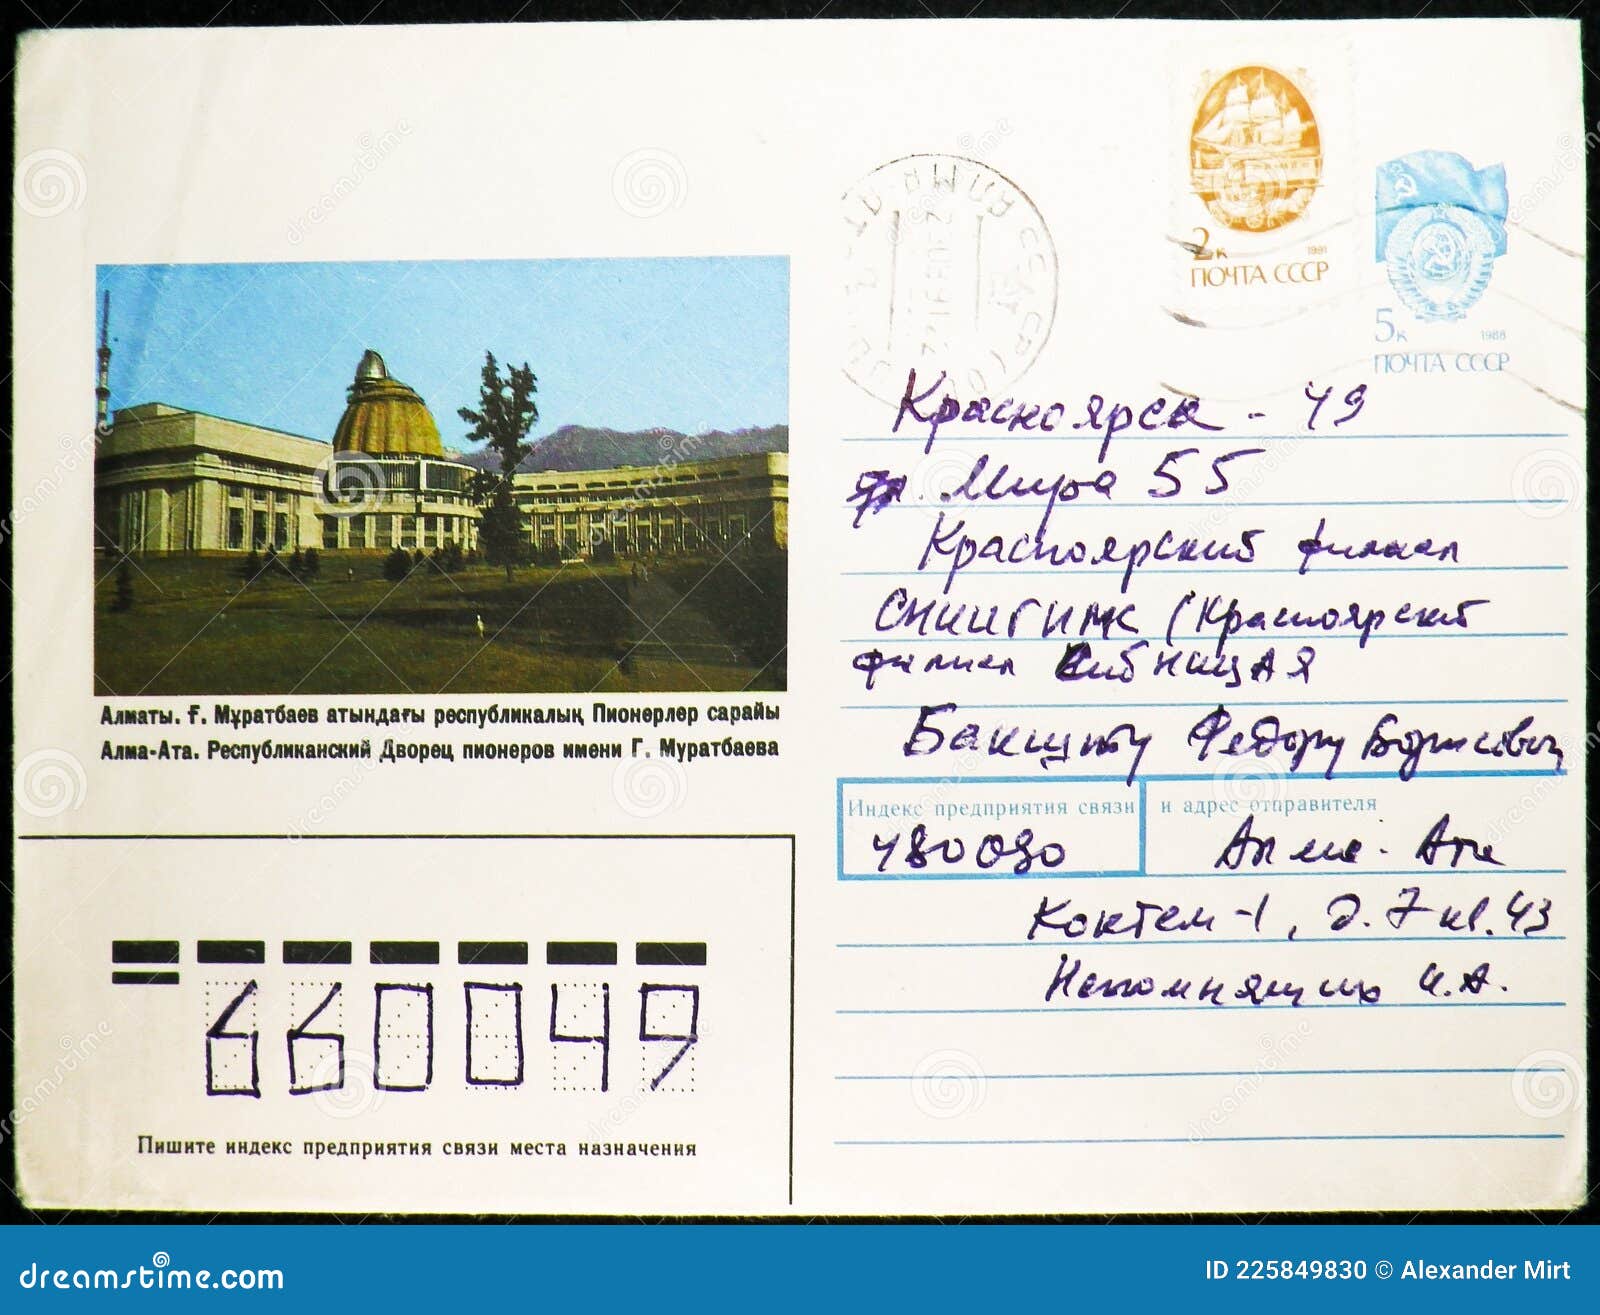 Almaty, G. Muratbayev Republican Palace of Pioneers, Addressed To